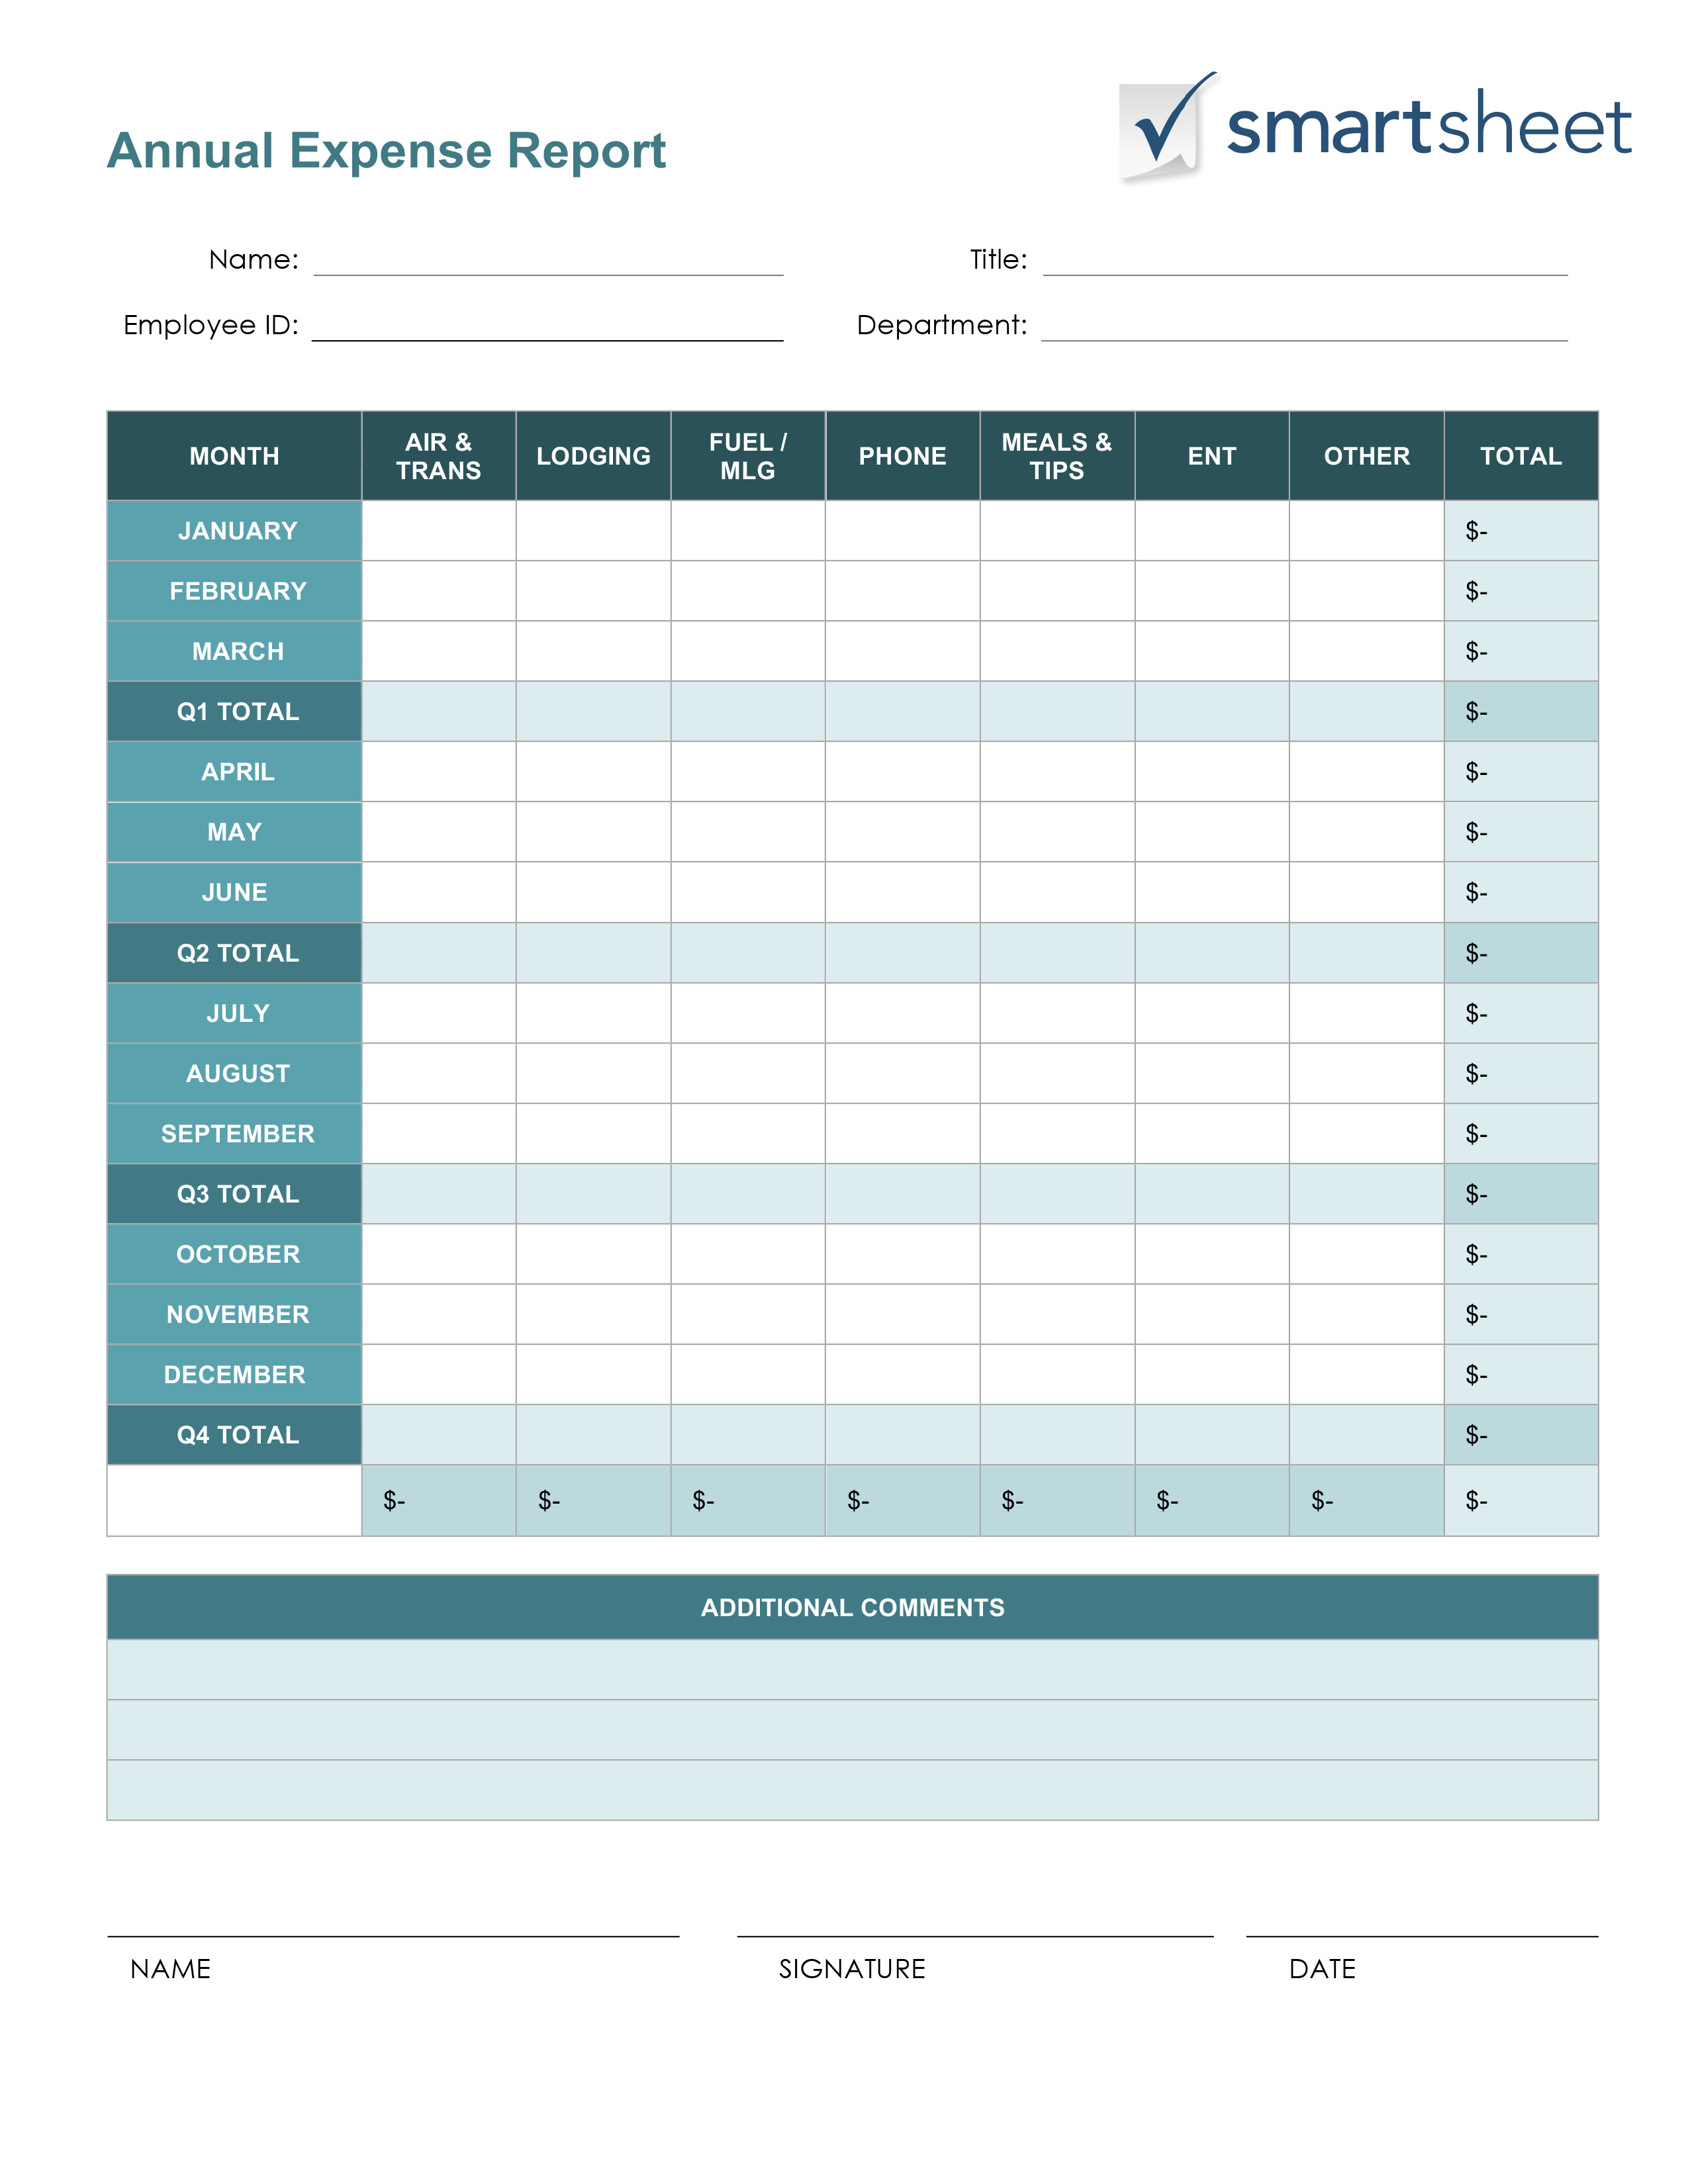 Free Expense Report Templates Smartsheet For Business Trip Expense Template